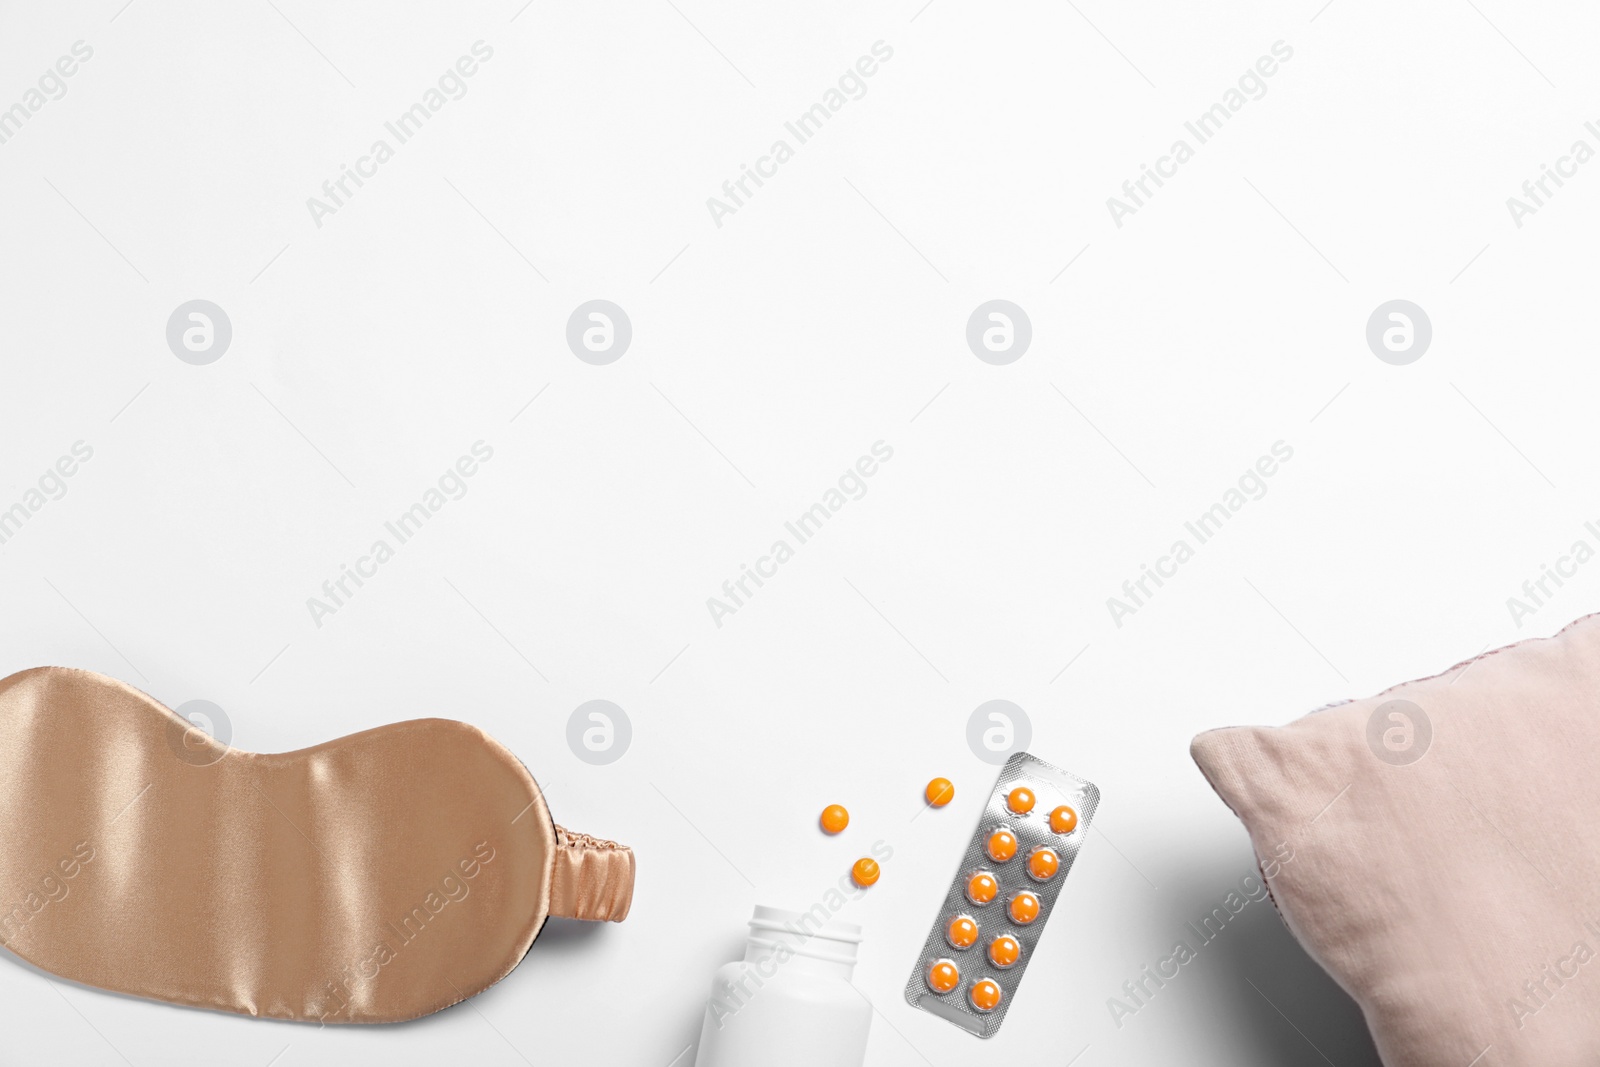 Photo of Composition with sleeping mask on white background, top view. Bedtime accessories